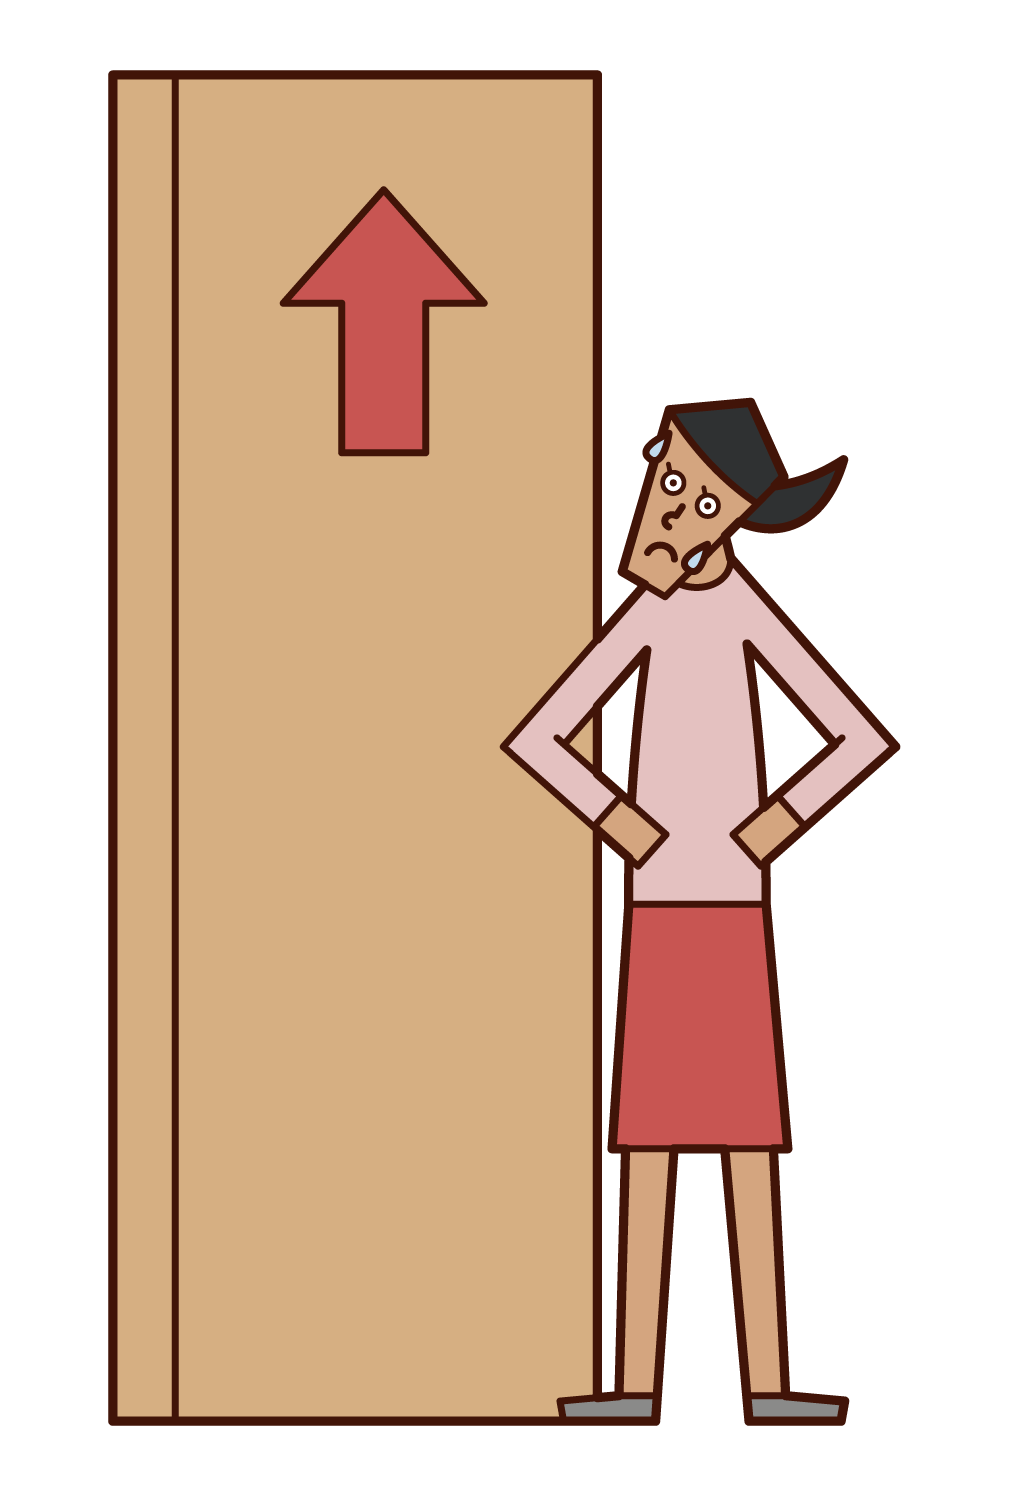 Illustration of a woman who faces barriers and trials